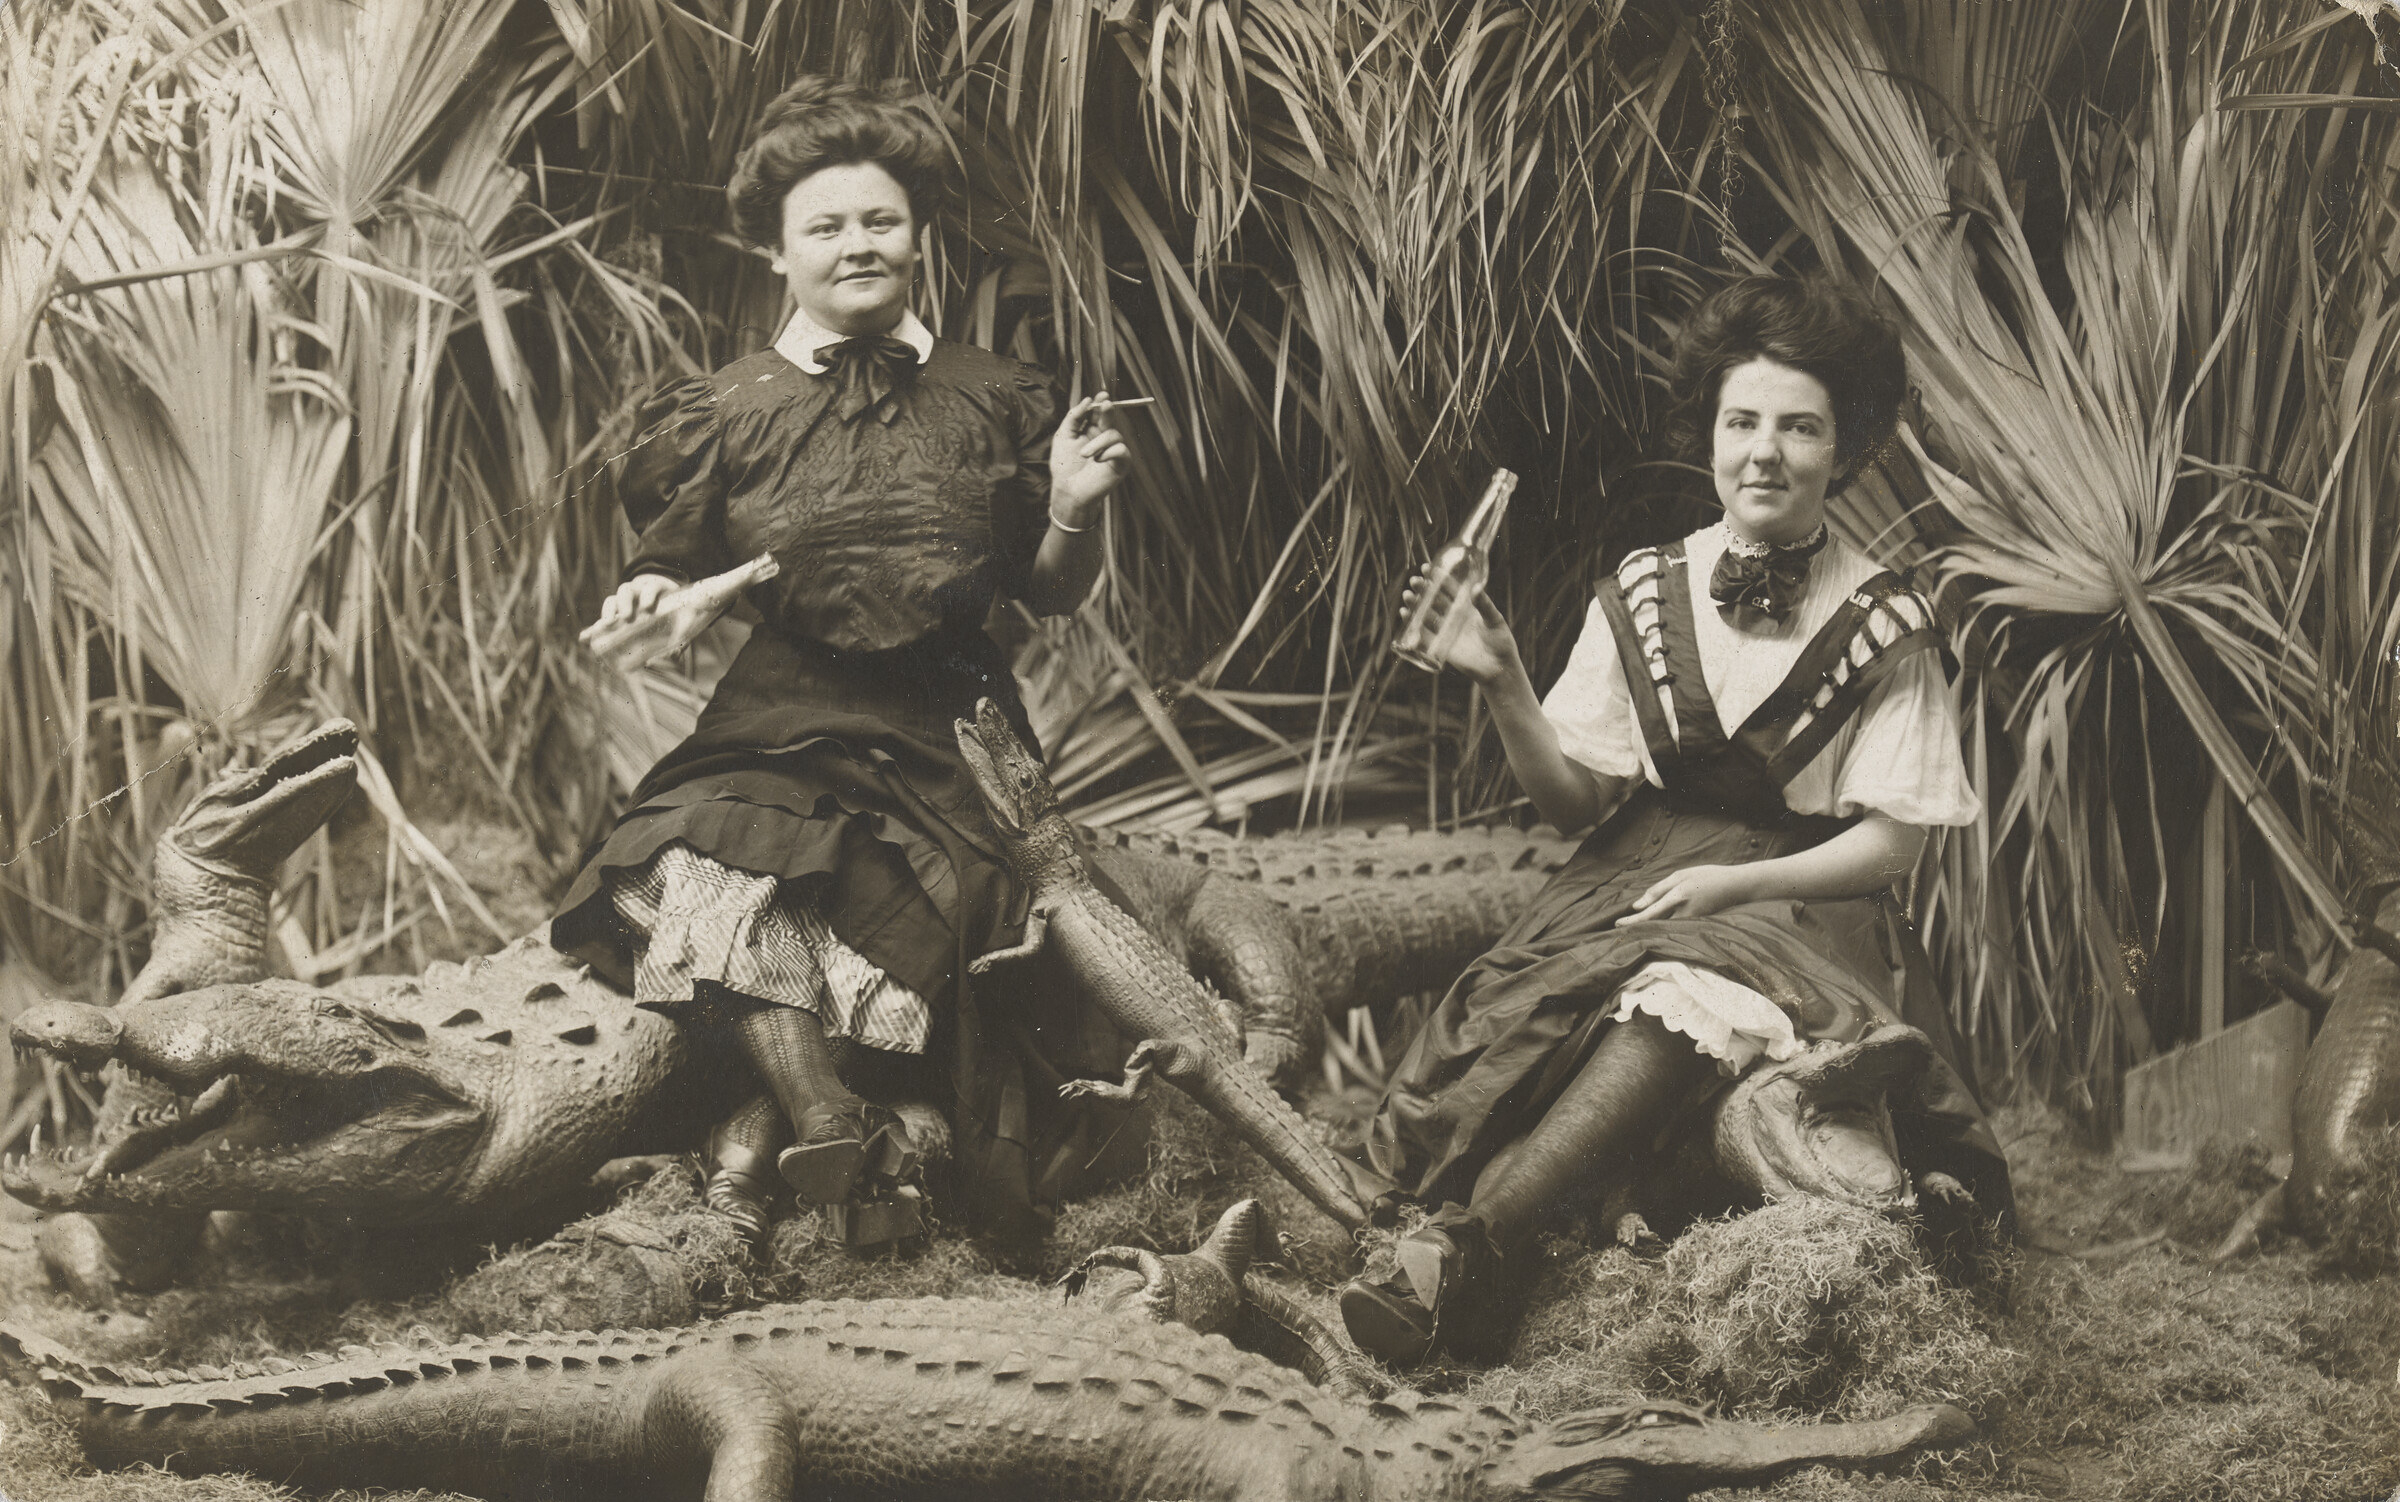 A black-and-white photograph of two women smoking and drinking out of bottles surrounded by fake alligators